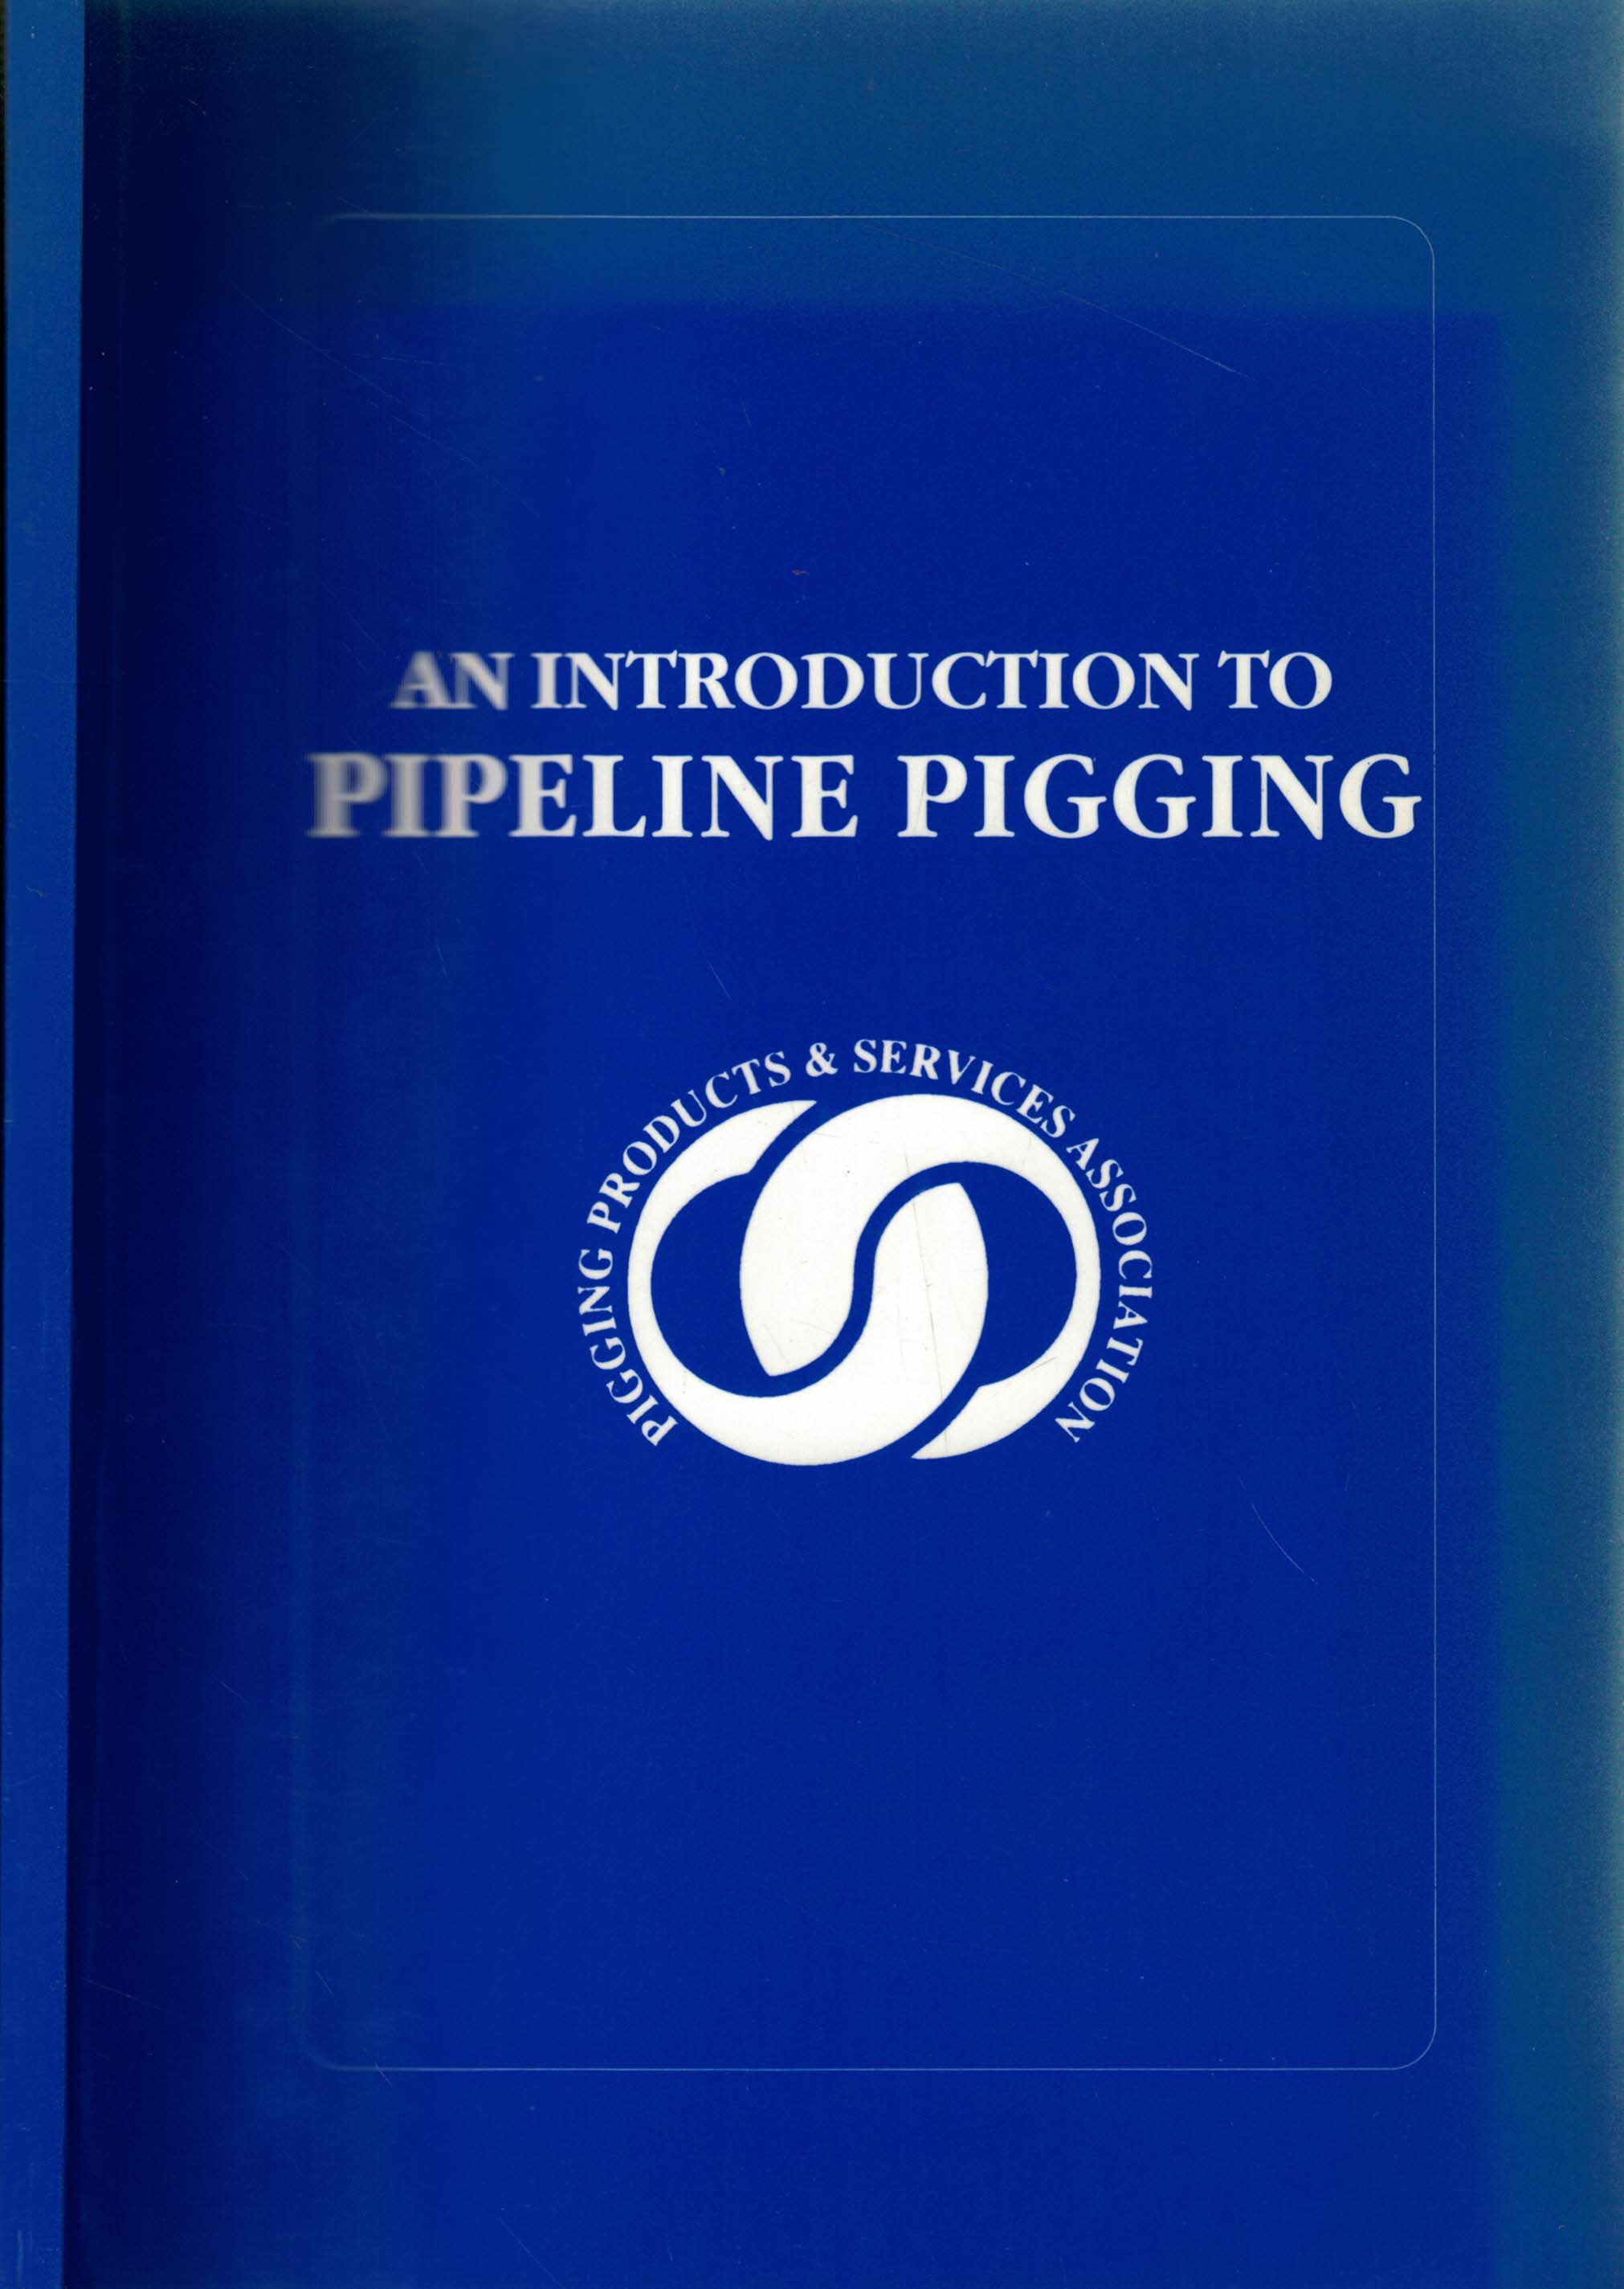 An Introduction to Pipeline Pigging. Pigging Products & Services Association.